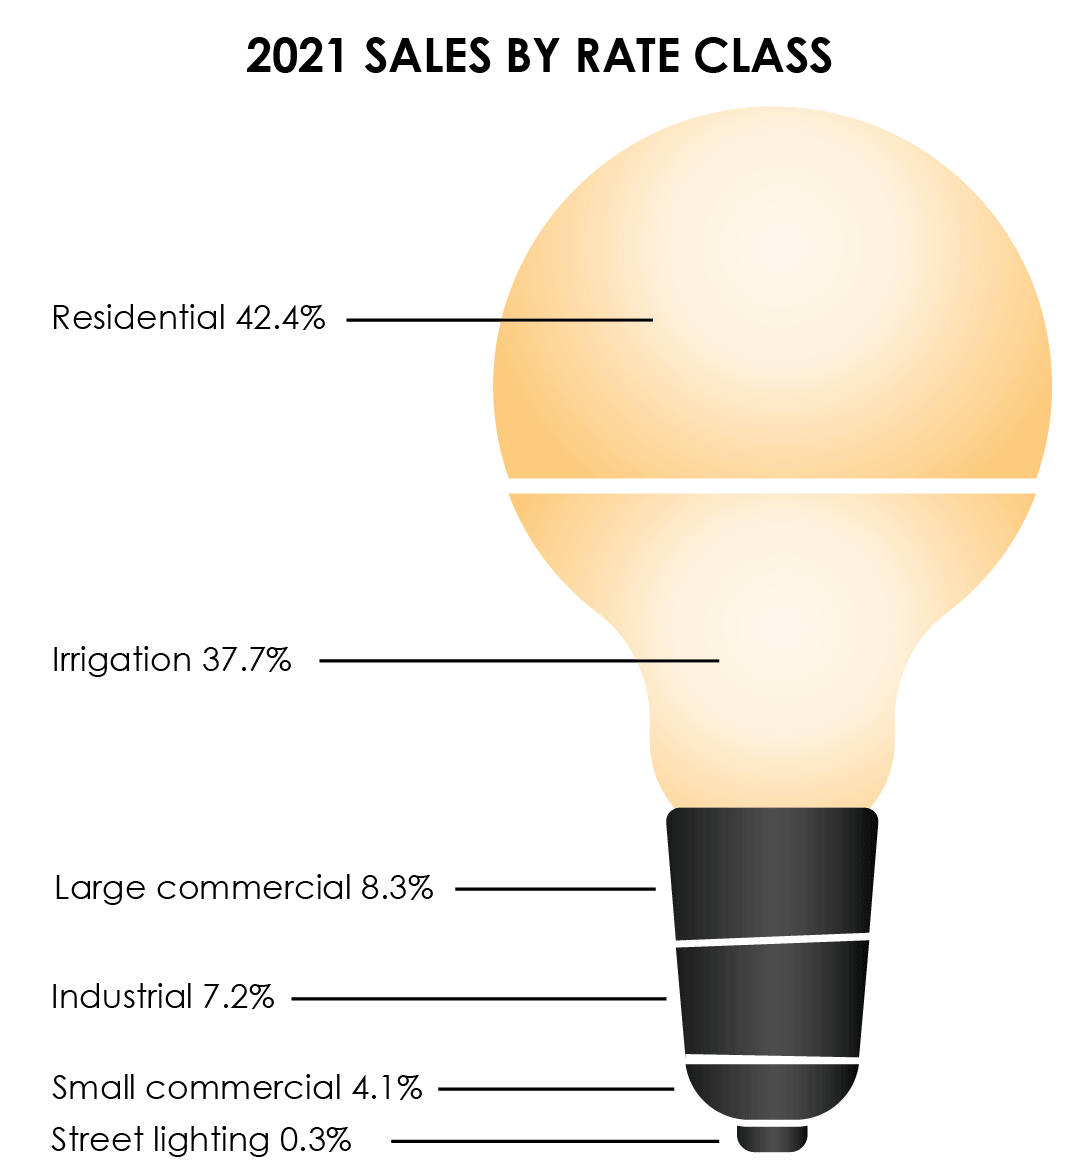 2021 DPPD sales by rate class